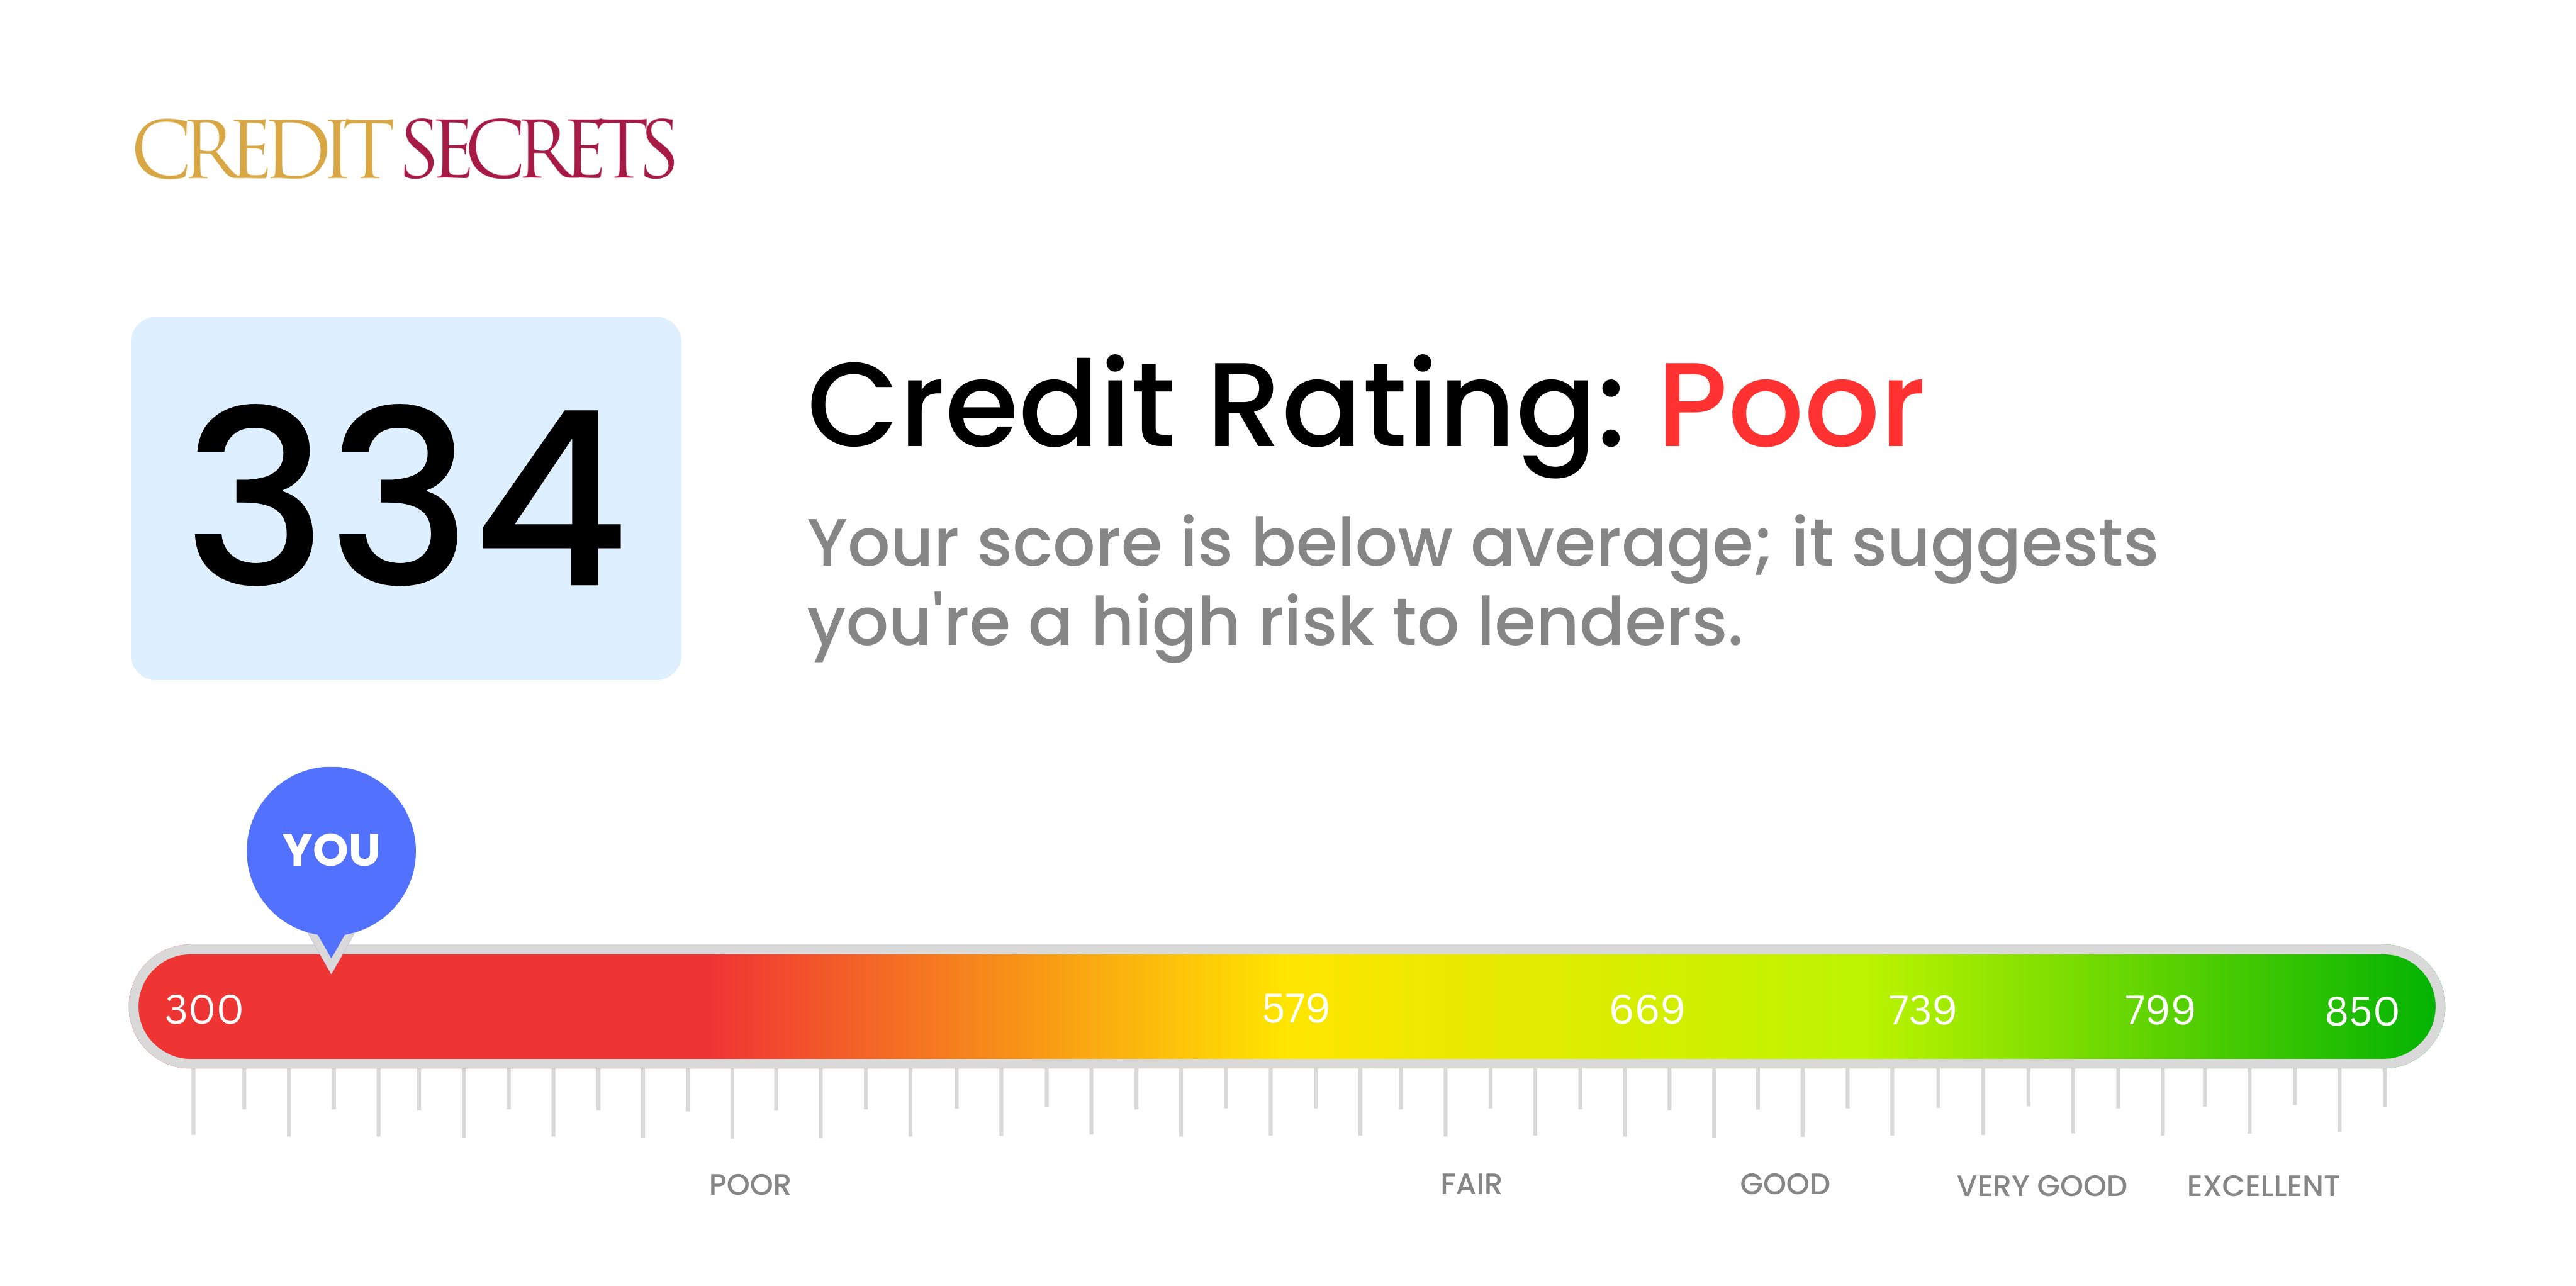 Is 334 a good credit score?